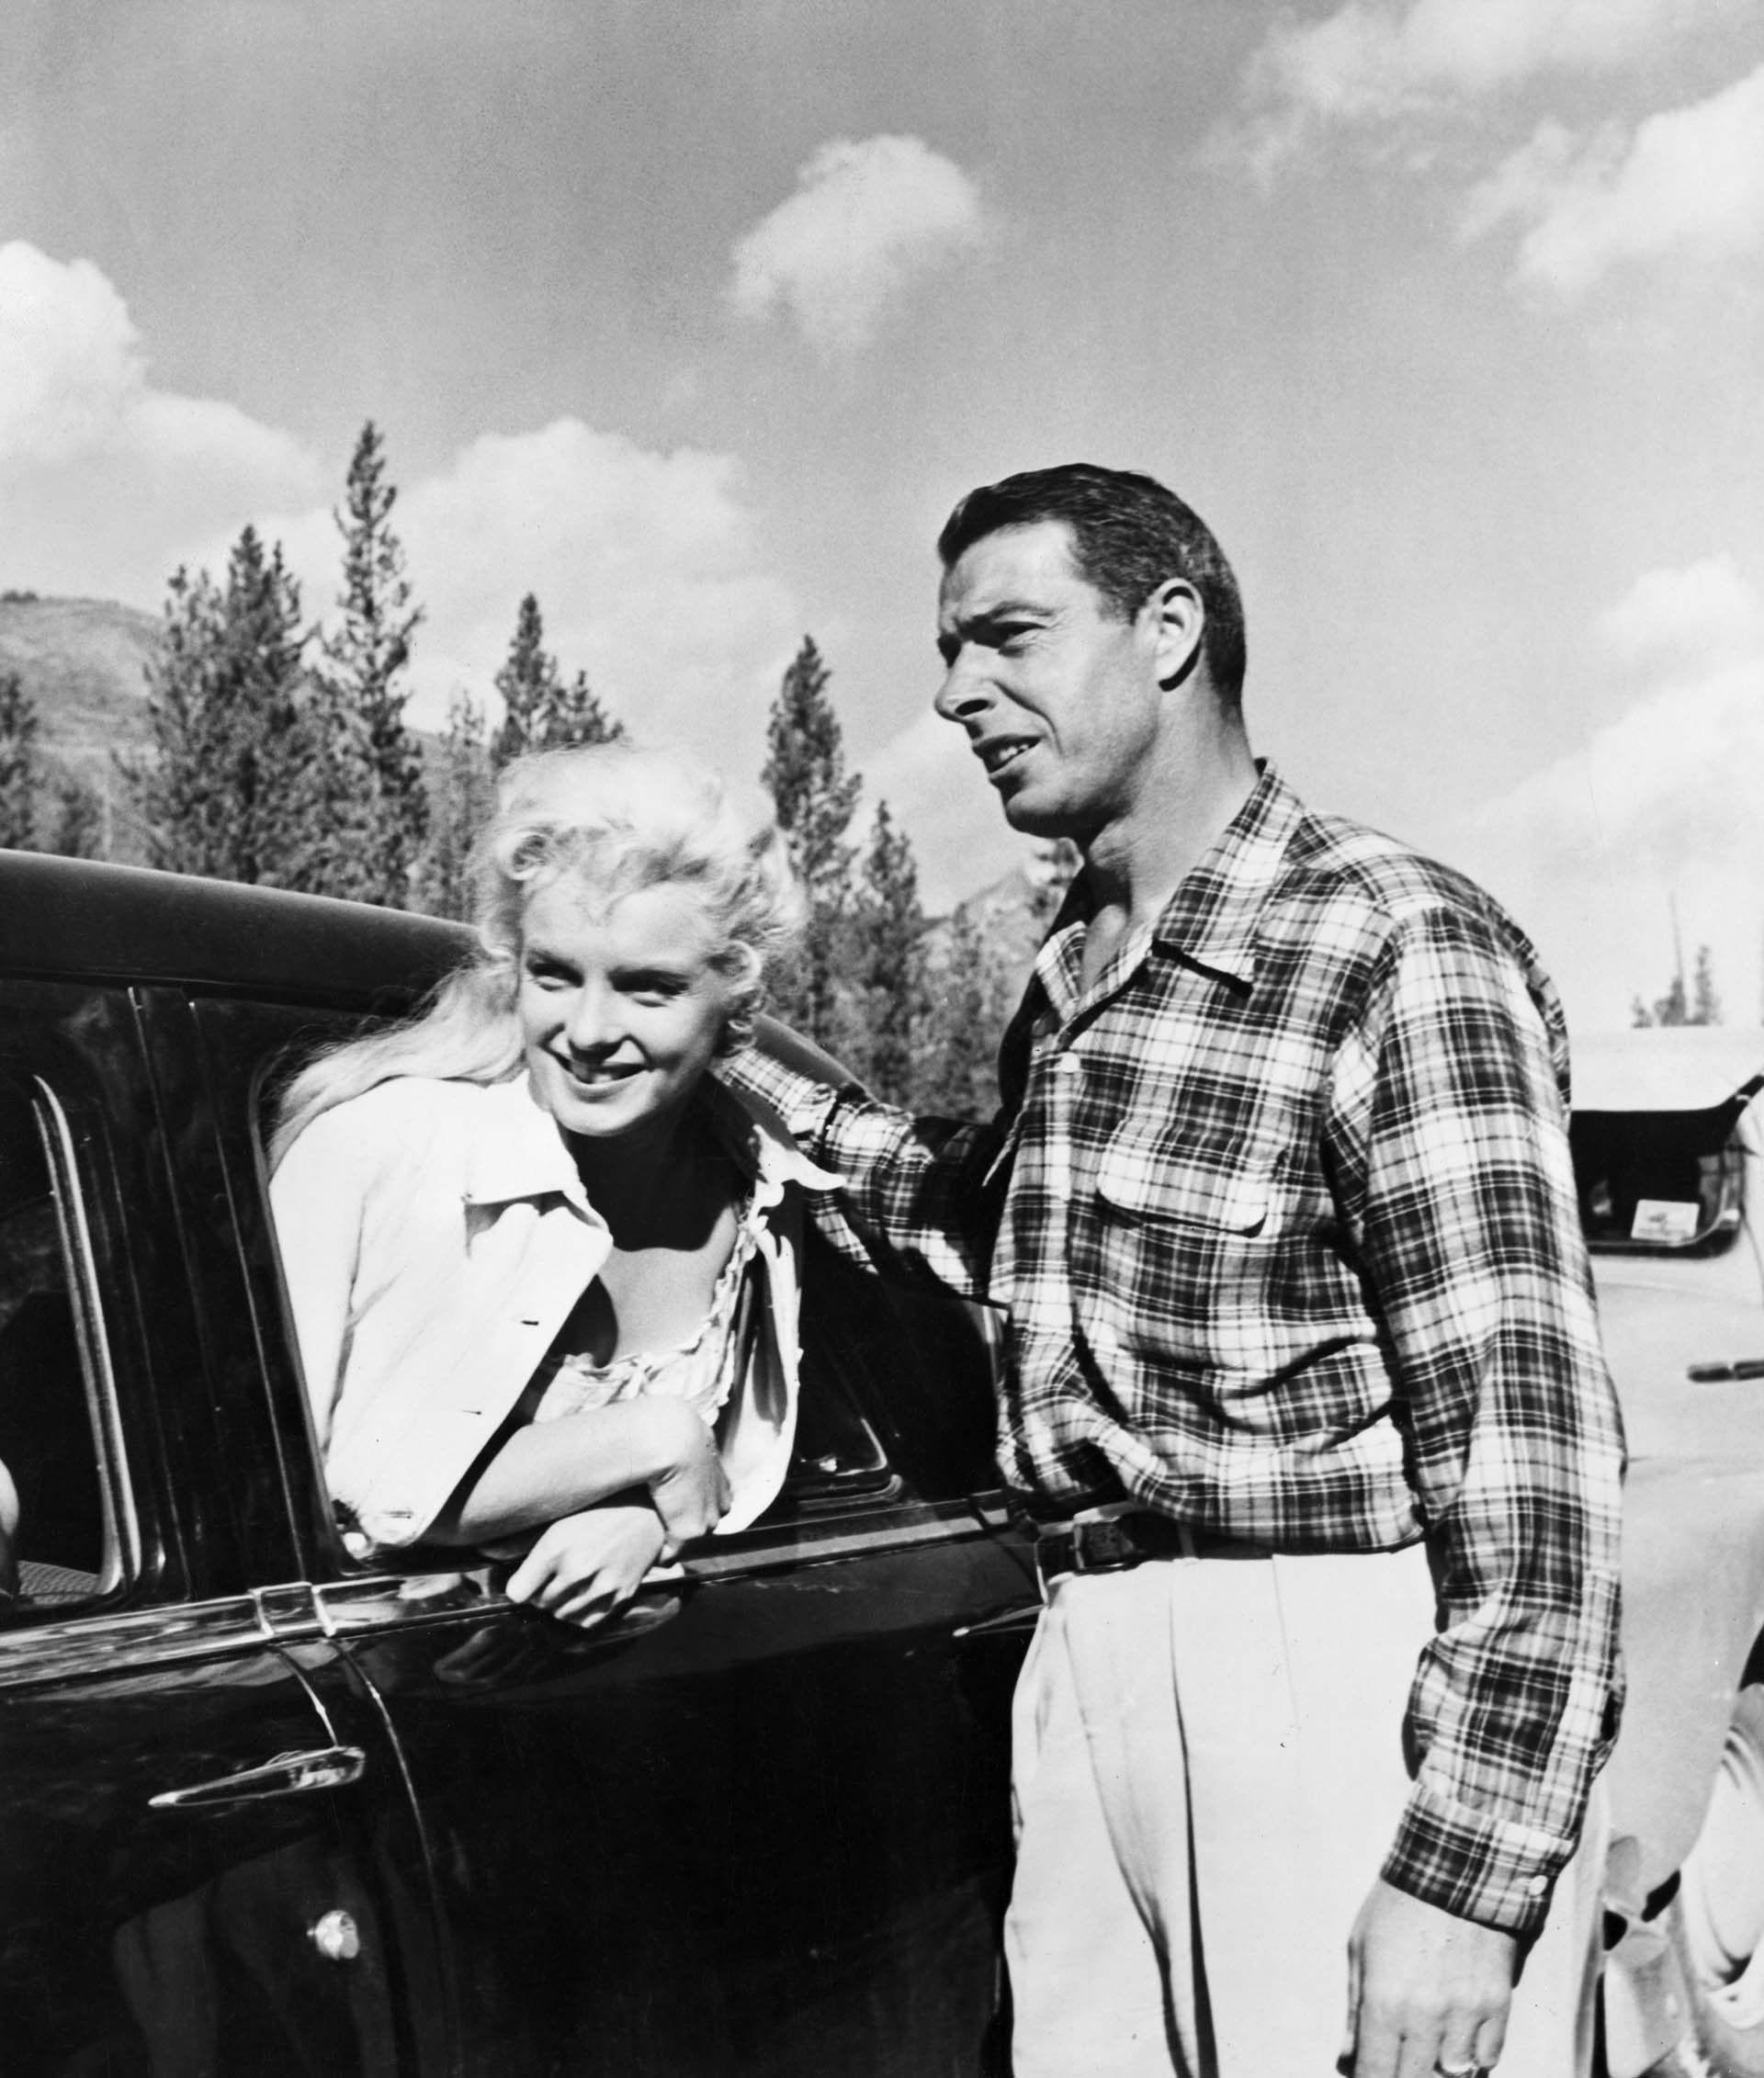 Joe DiMaggio visits Marilyn Monroe, on location in the Canadian wilderness, while filming River of No Return (Getty)